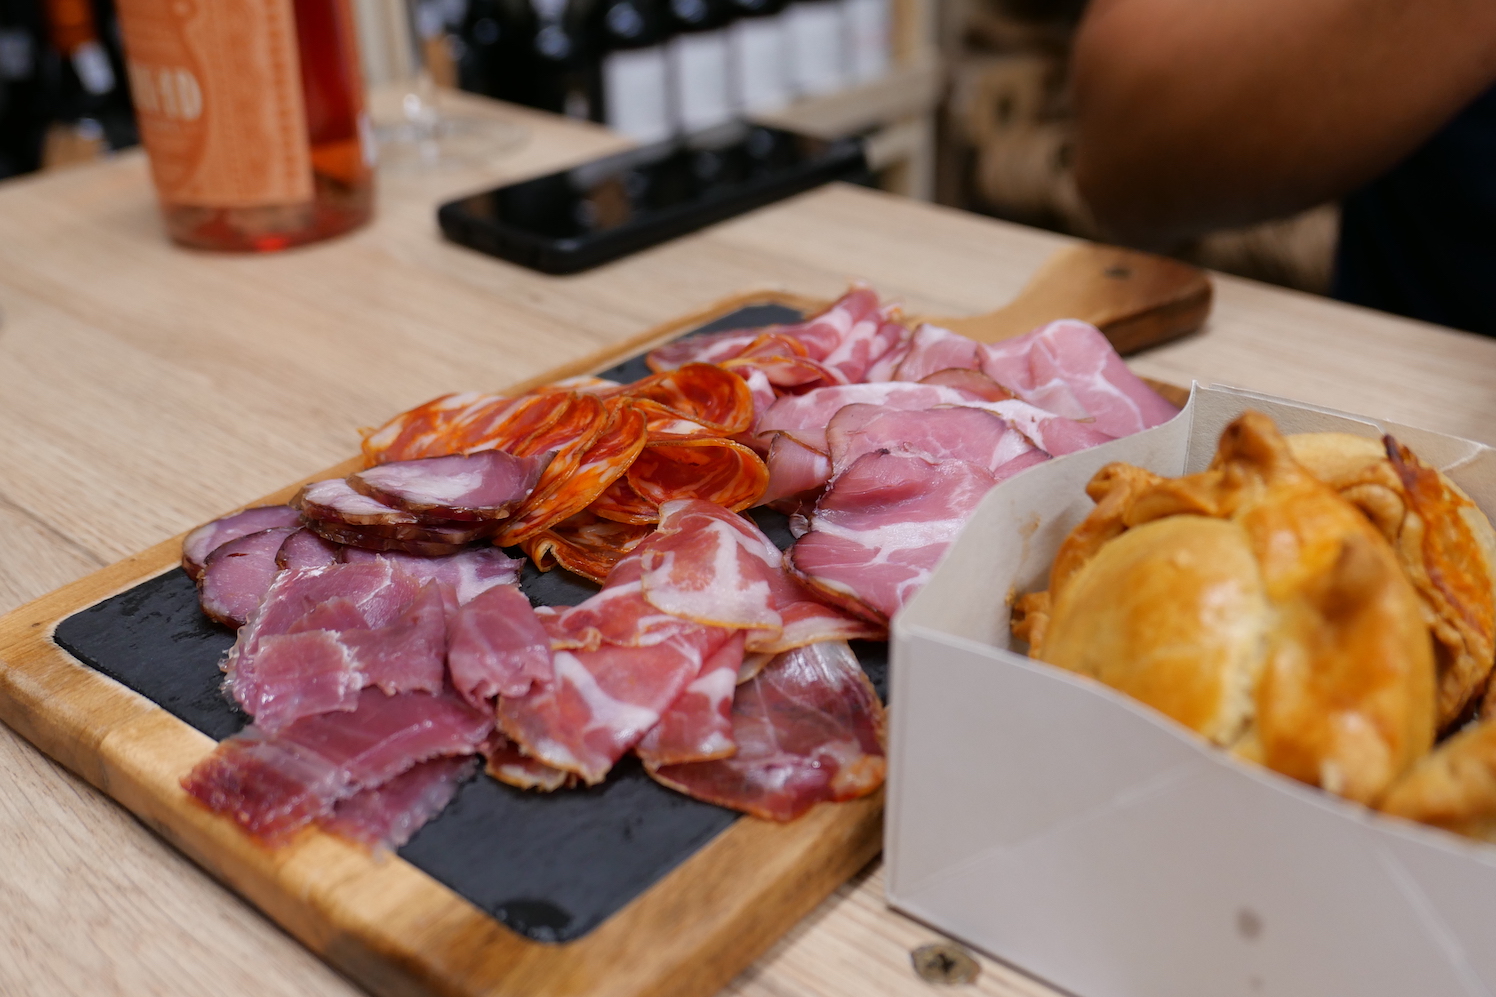 Jamón Ibérico and baked pastries